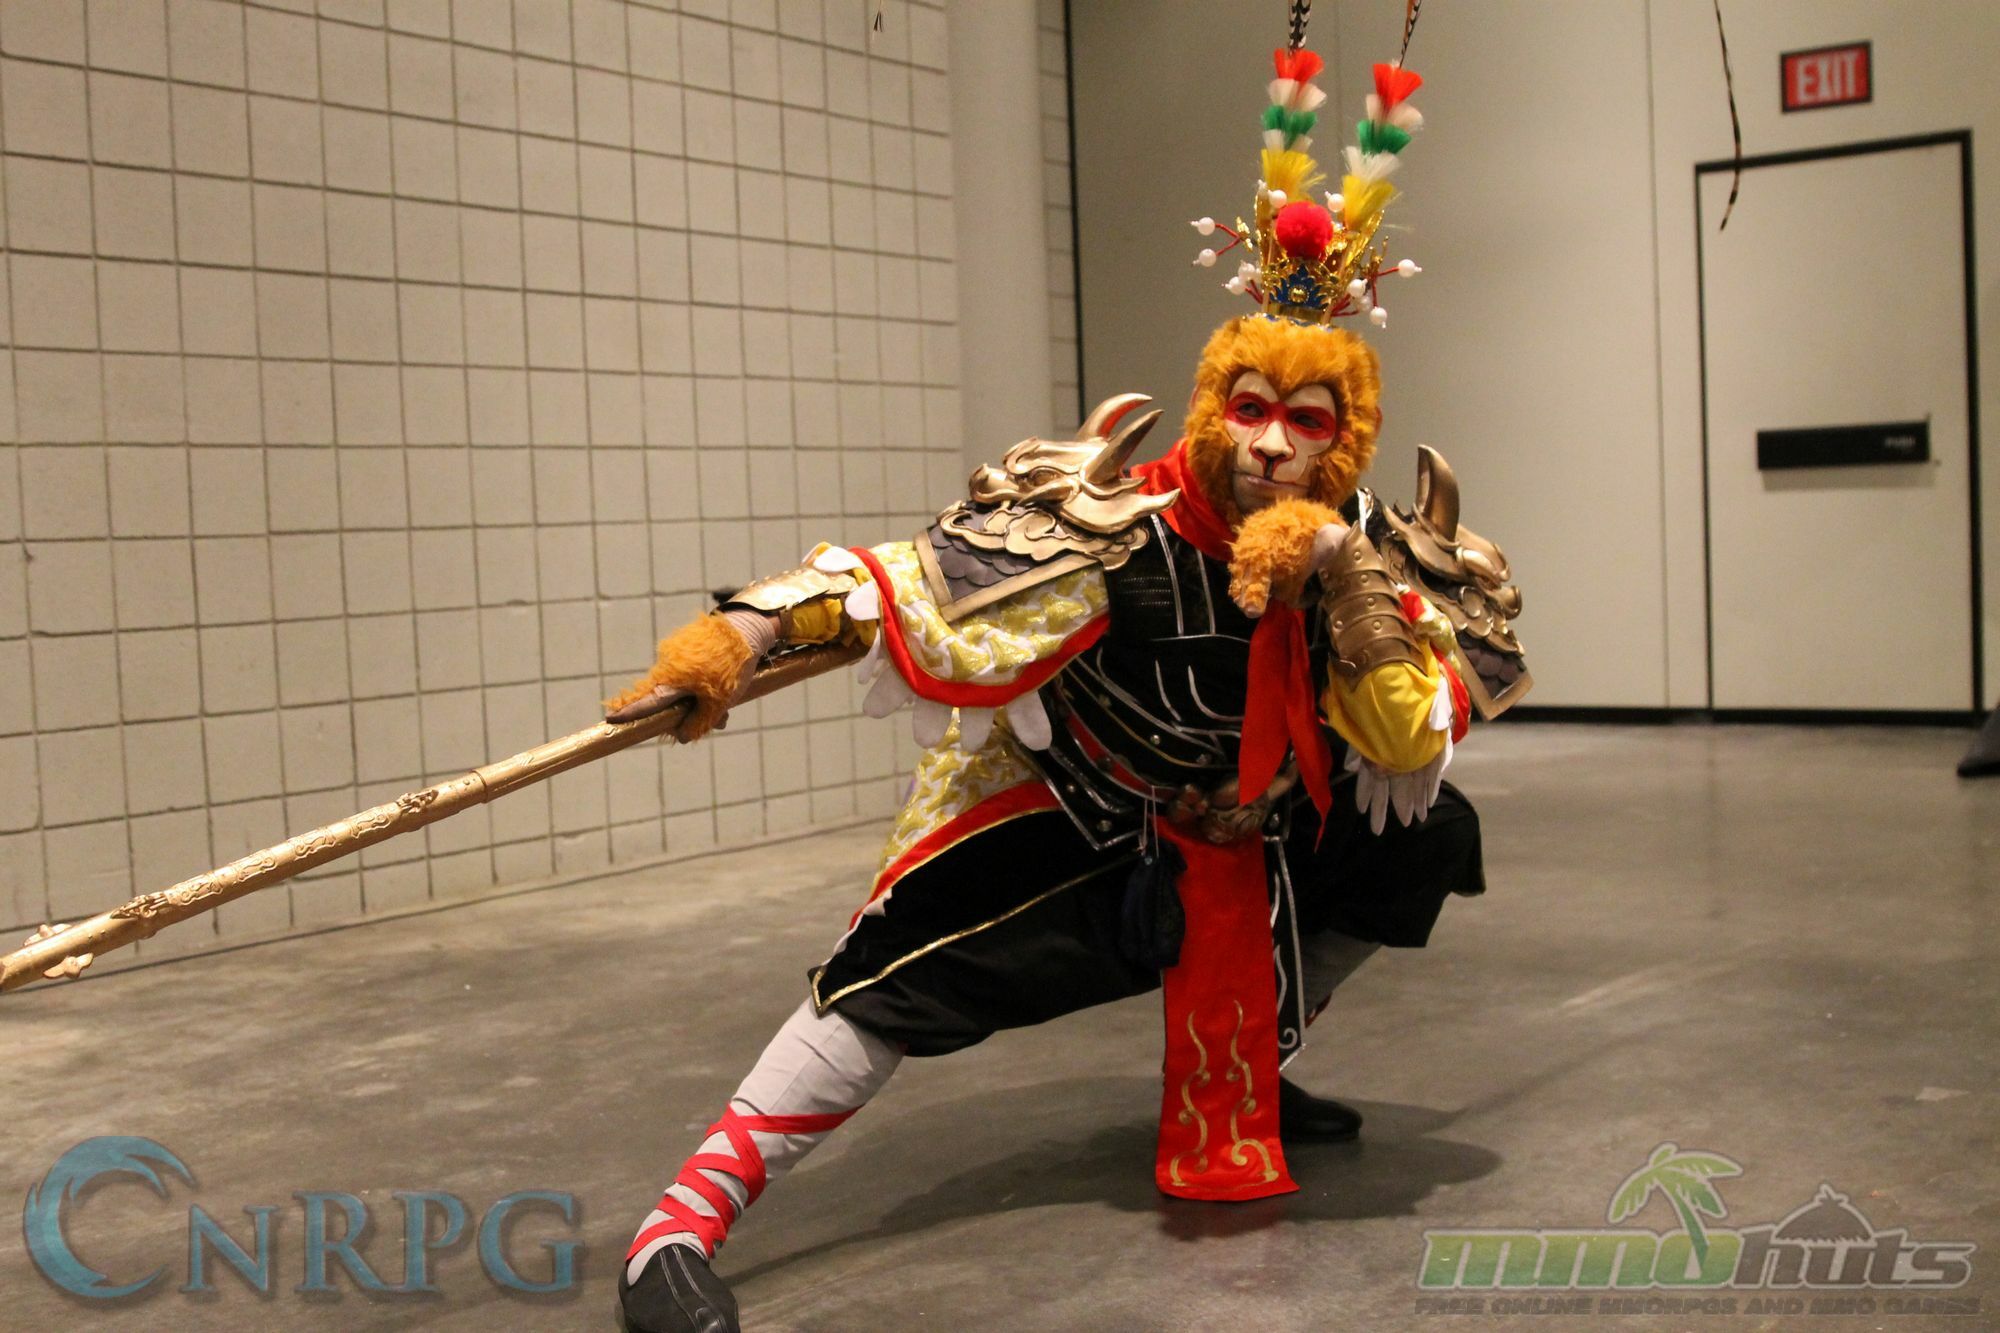 NYCC 2015 Day 3 WuKong Cosplay